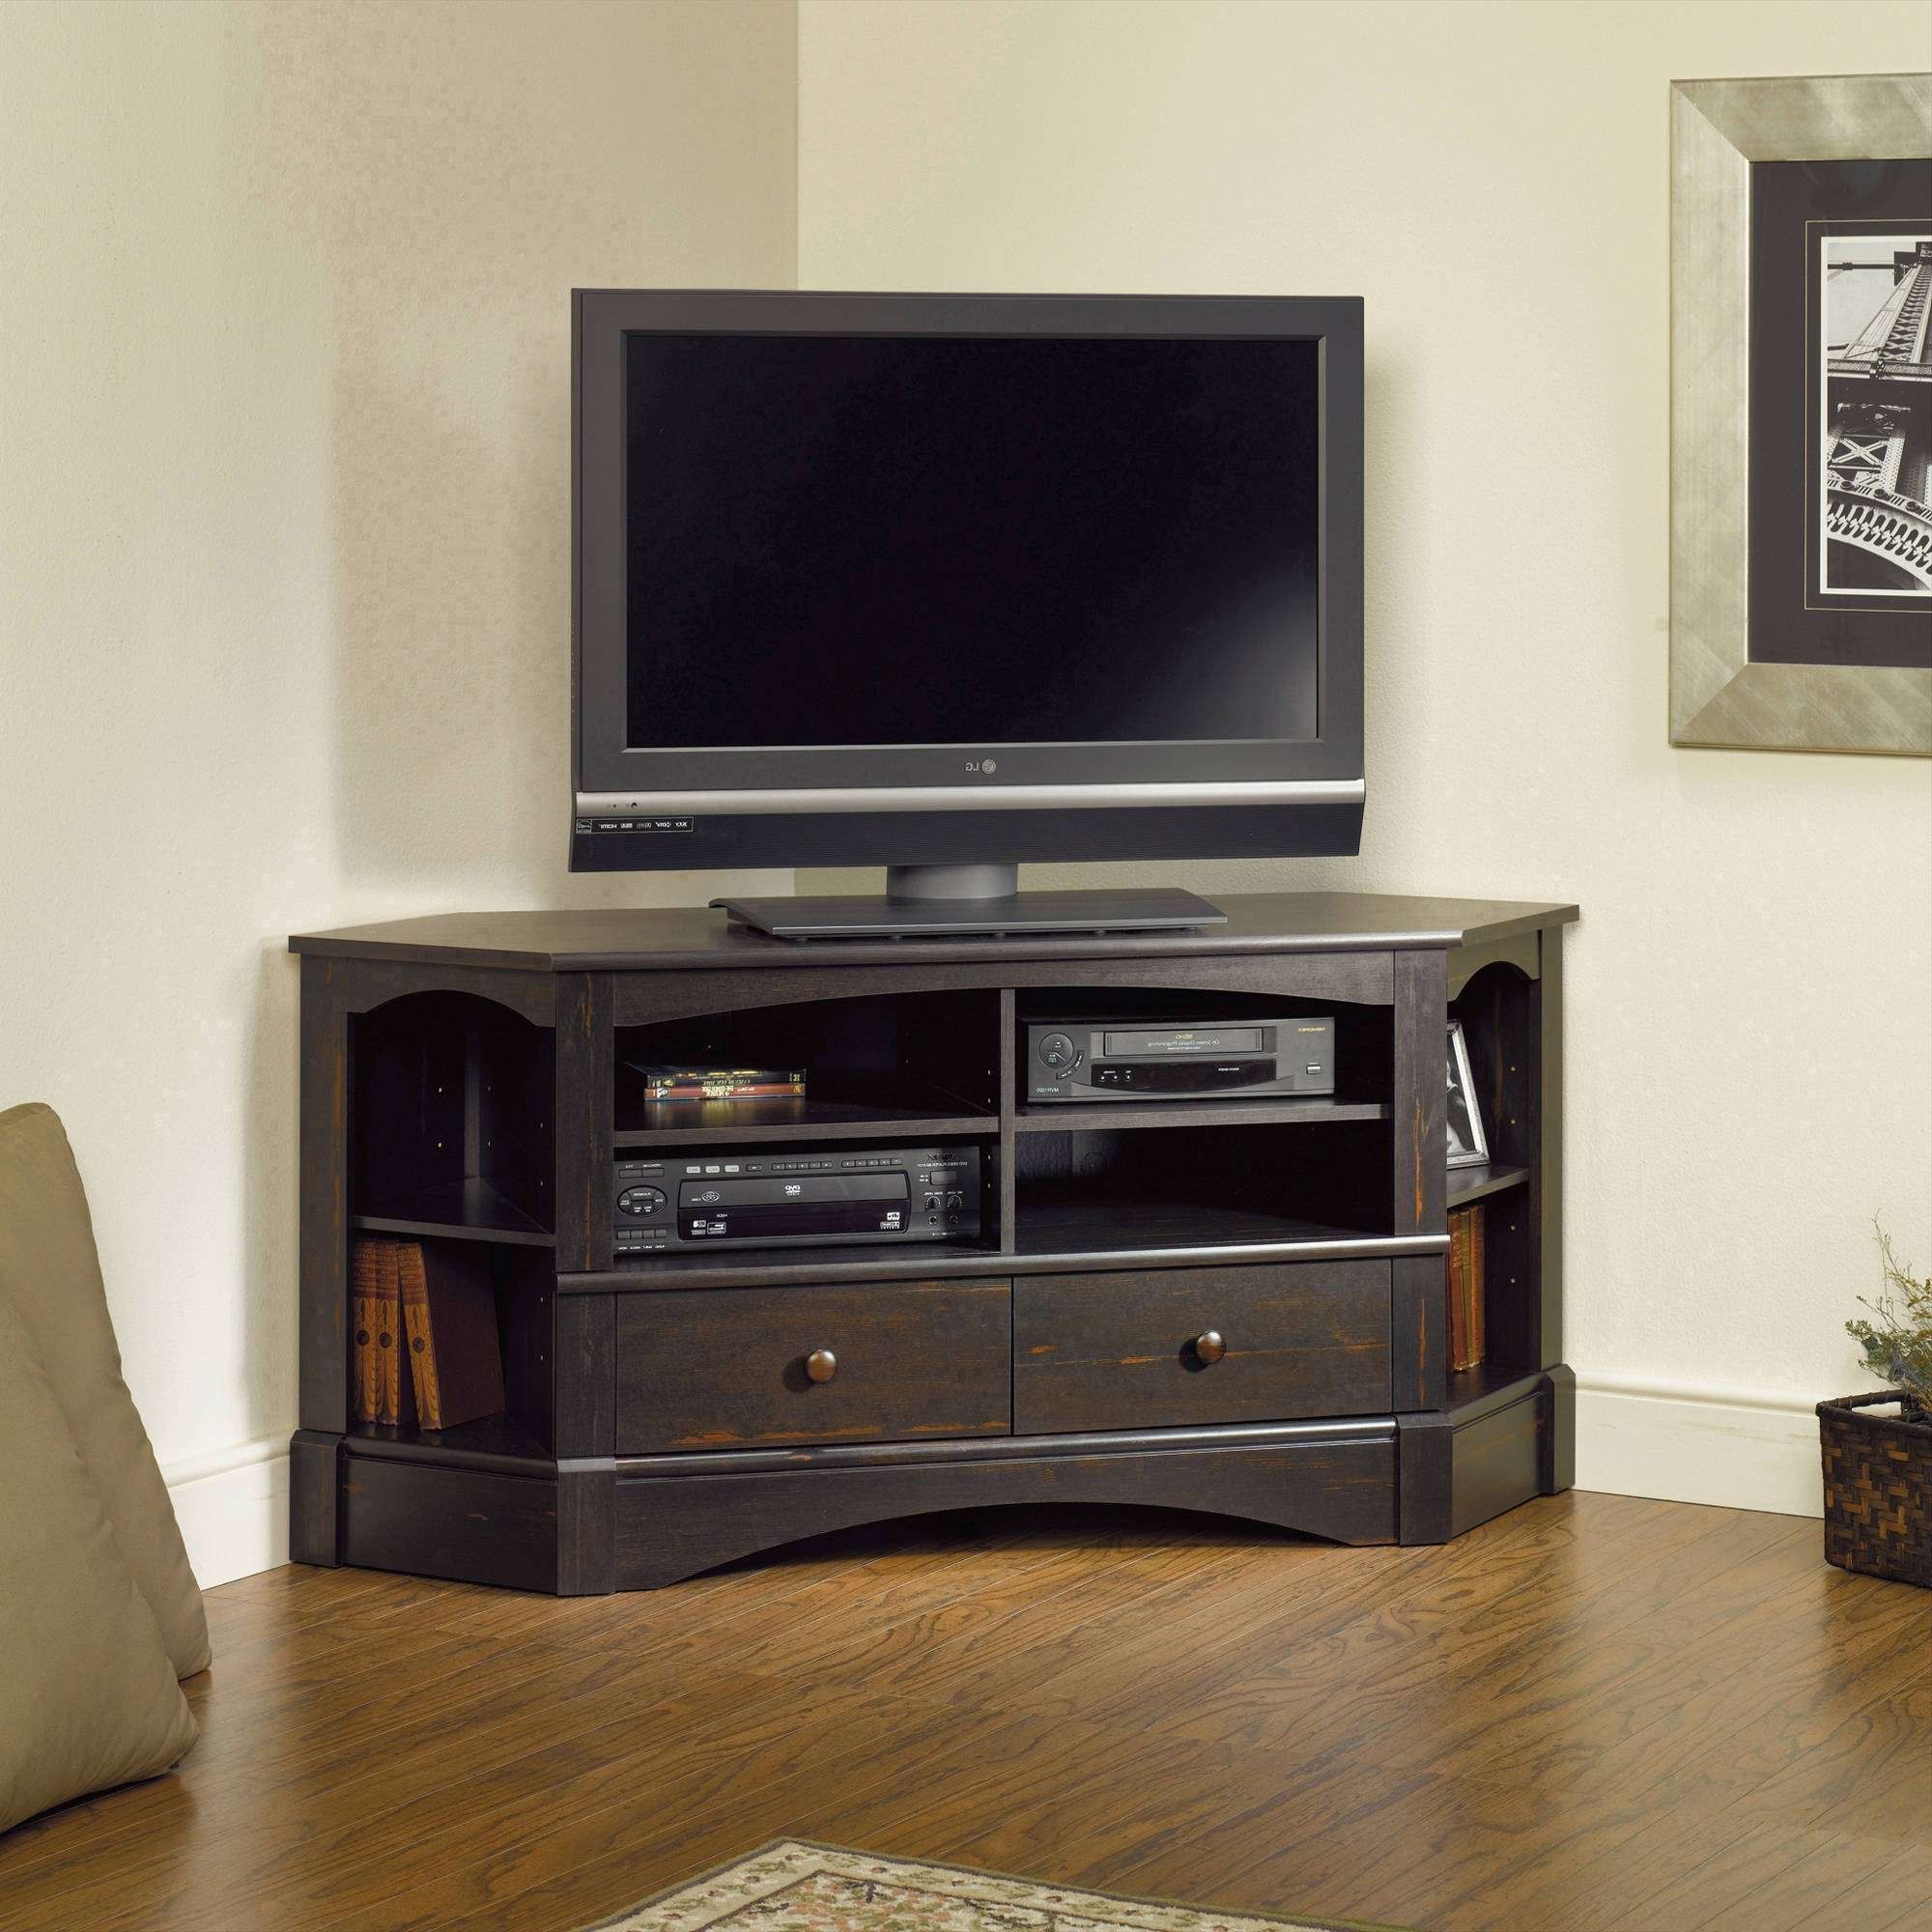 Wall Units. Amusing Walmart Tv Stands And Entertainment Centers Throughout Entertainment Center Tv Stands (Gallery 12 of 15)